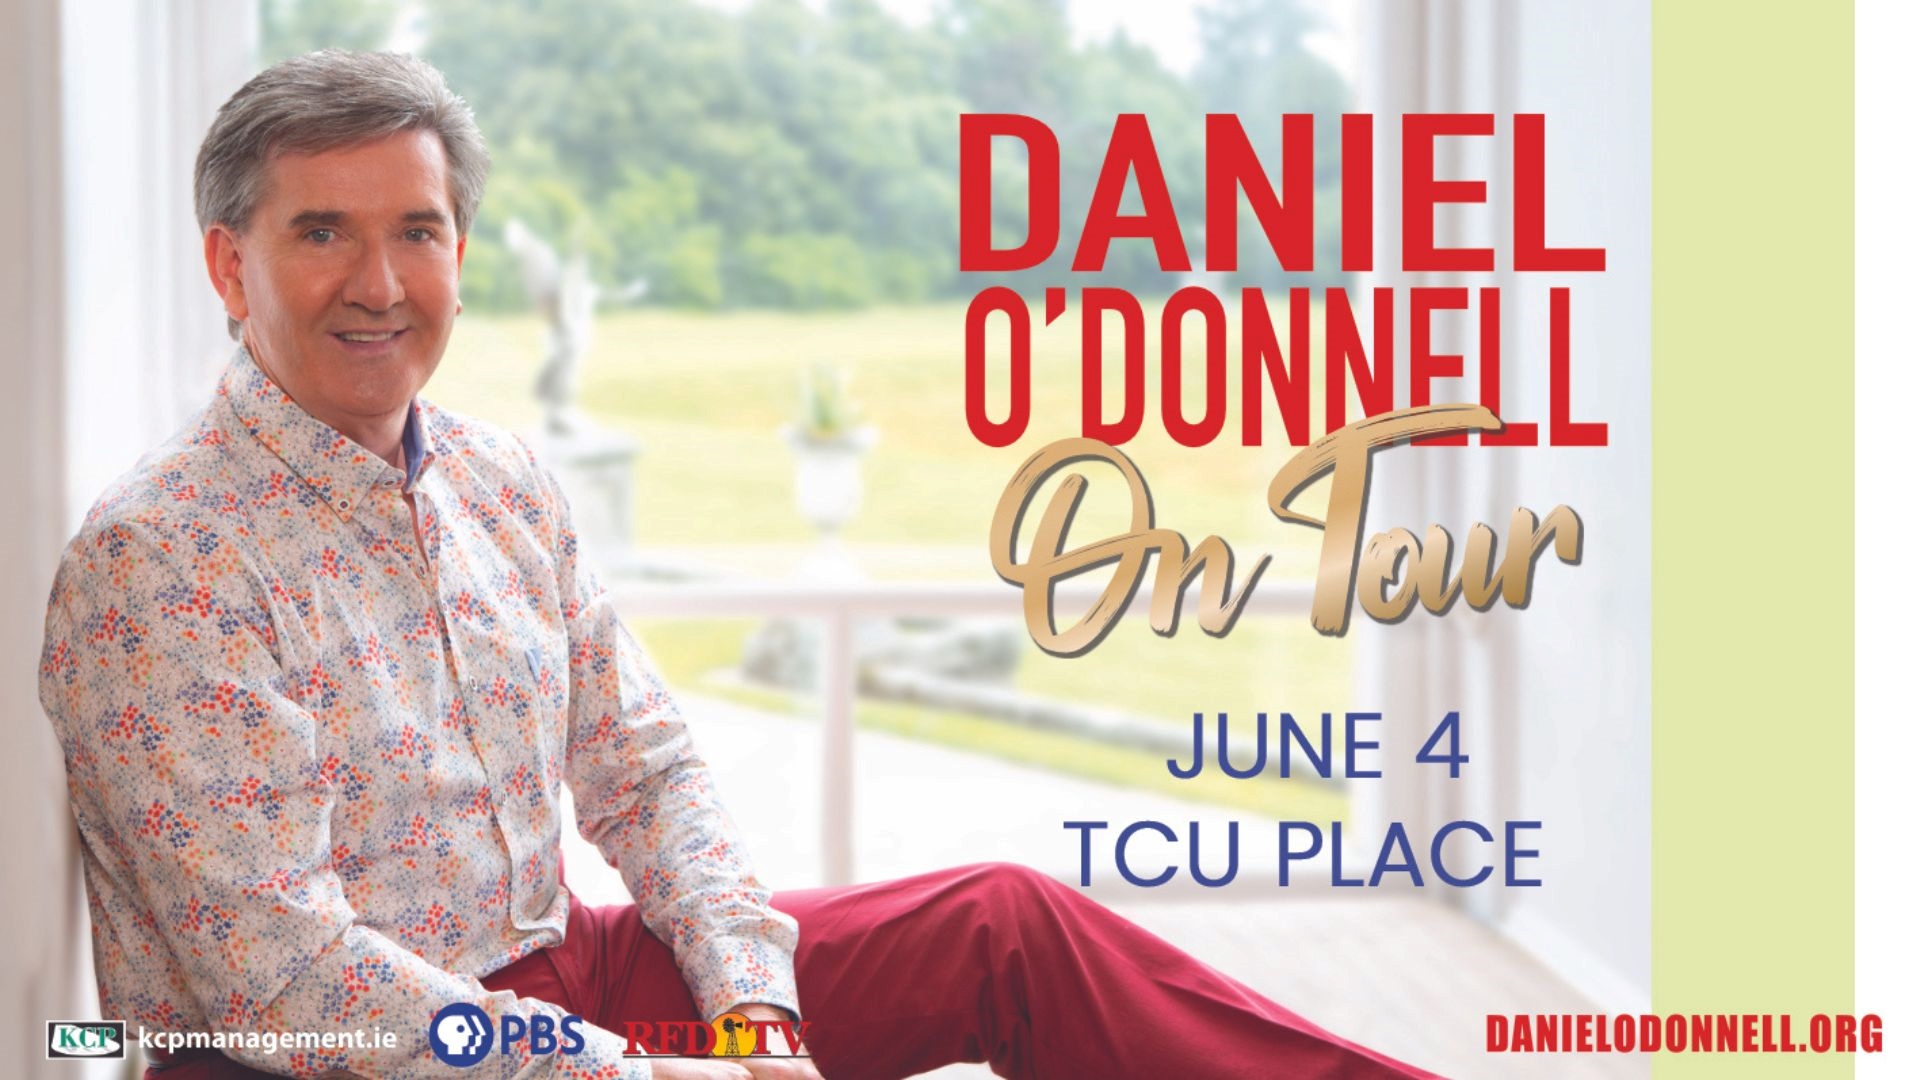 Daniel O'Donnell - June 4th at TCU Place